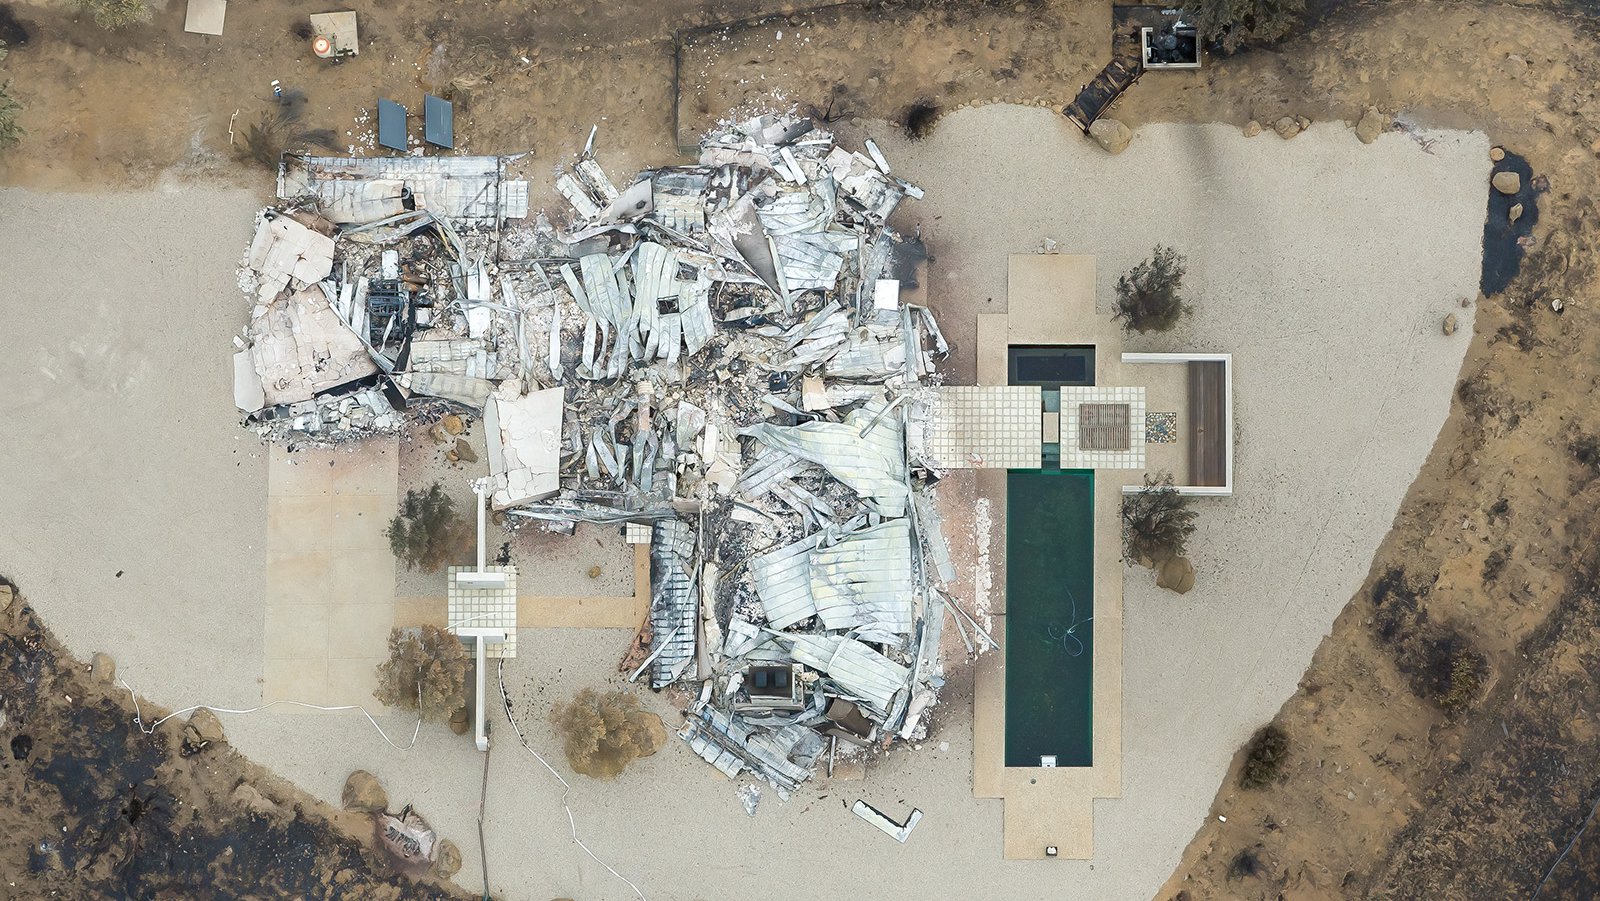 This aerial photograph shows the ruins of a home in Arroyo Sequit that was completely destroyed by the Woolsey Fire in November 2018.